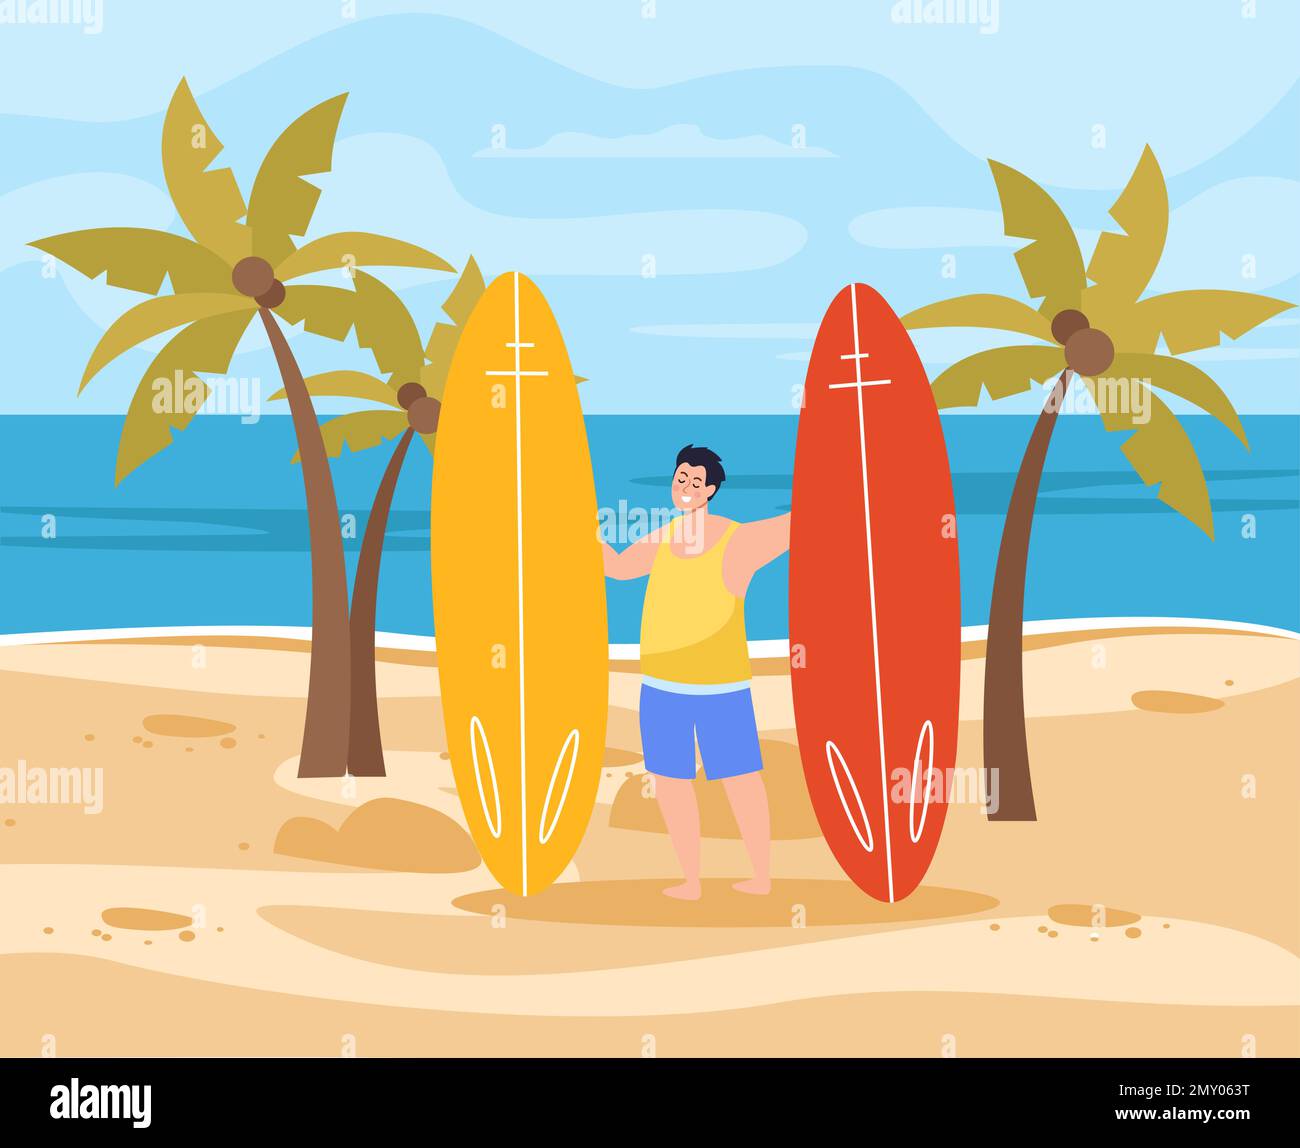 Summer vacation on south beach flat background with happy male character holding two surf boards vector illustration Stock Vector